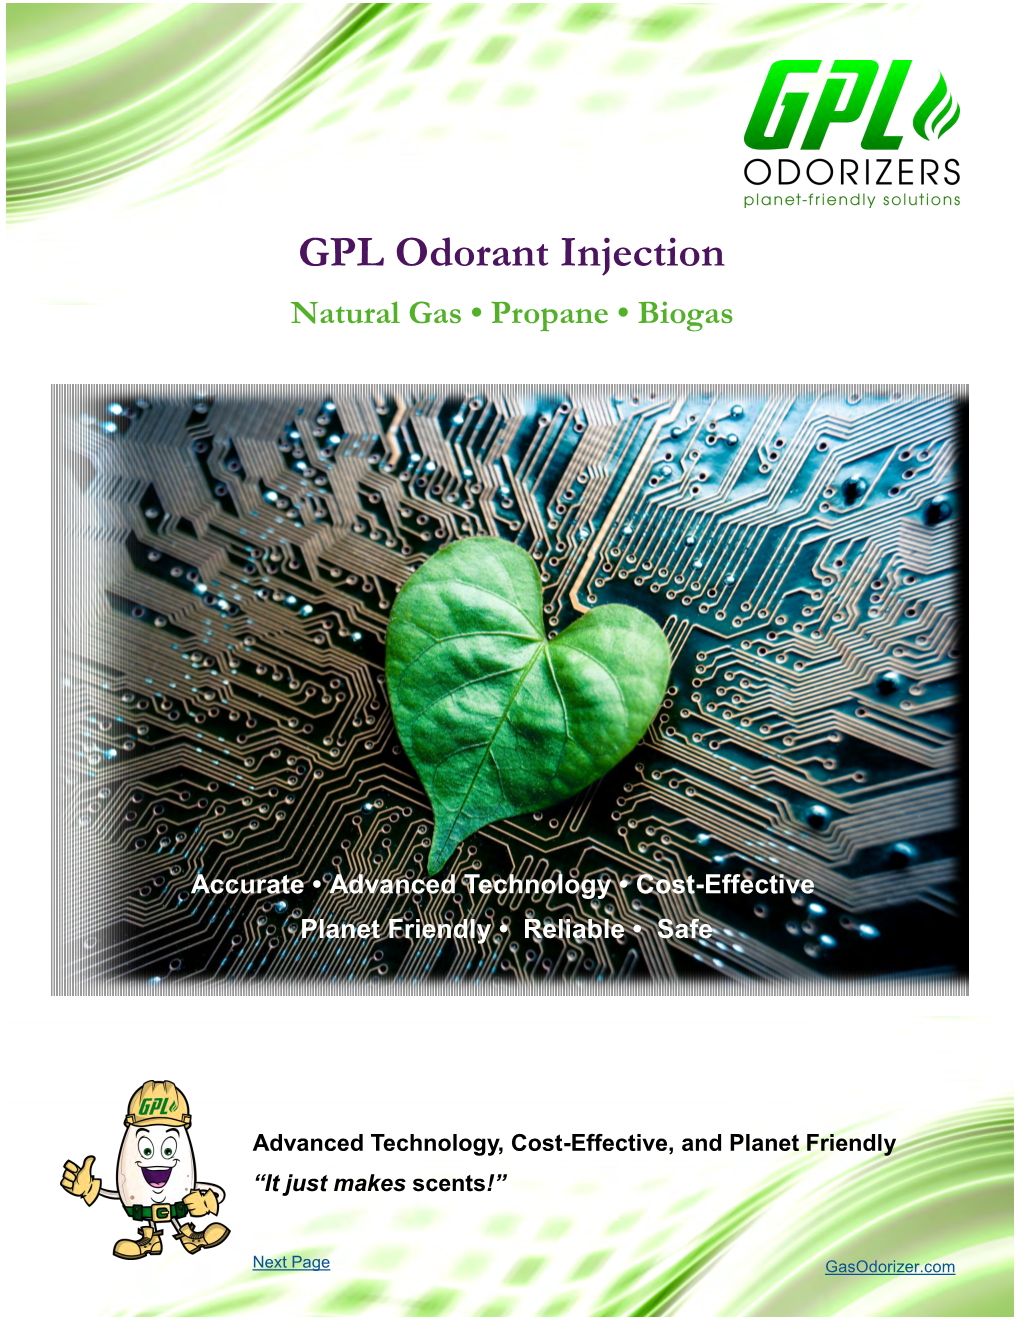 Odorant Injection Systems for Natural Gas, Biogas, and Propane